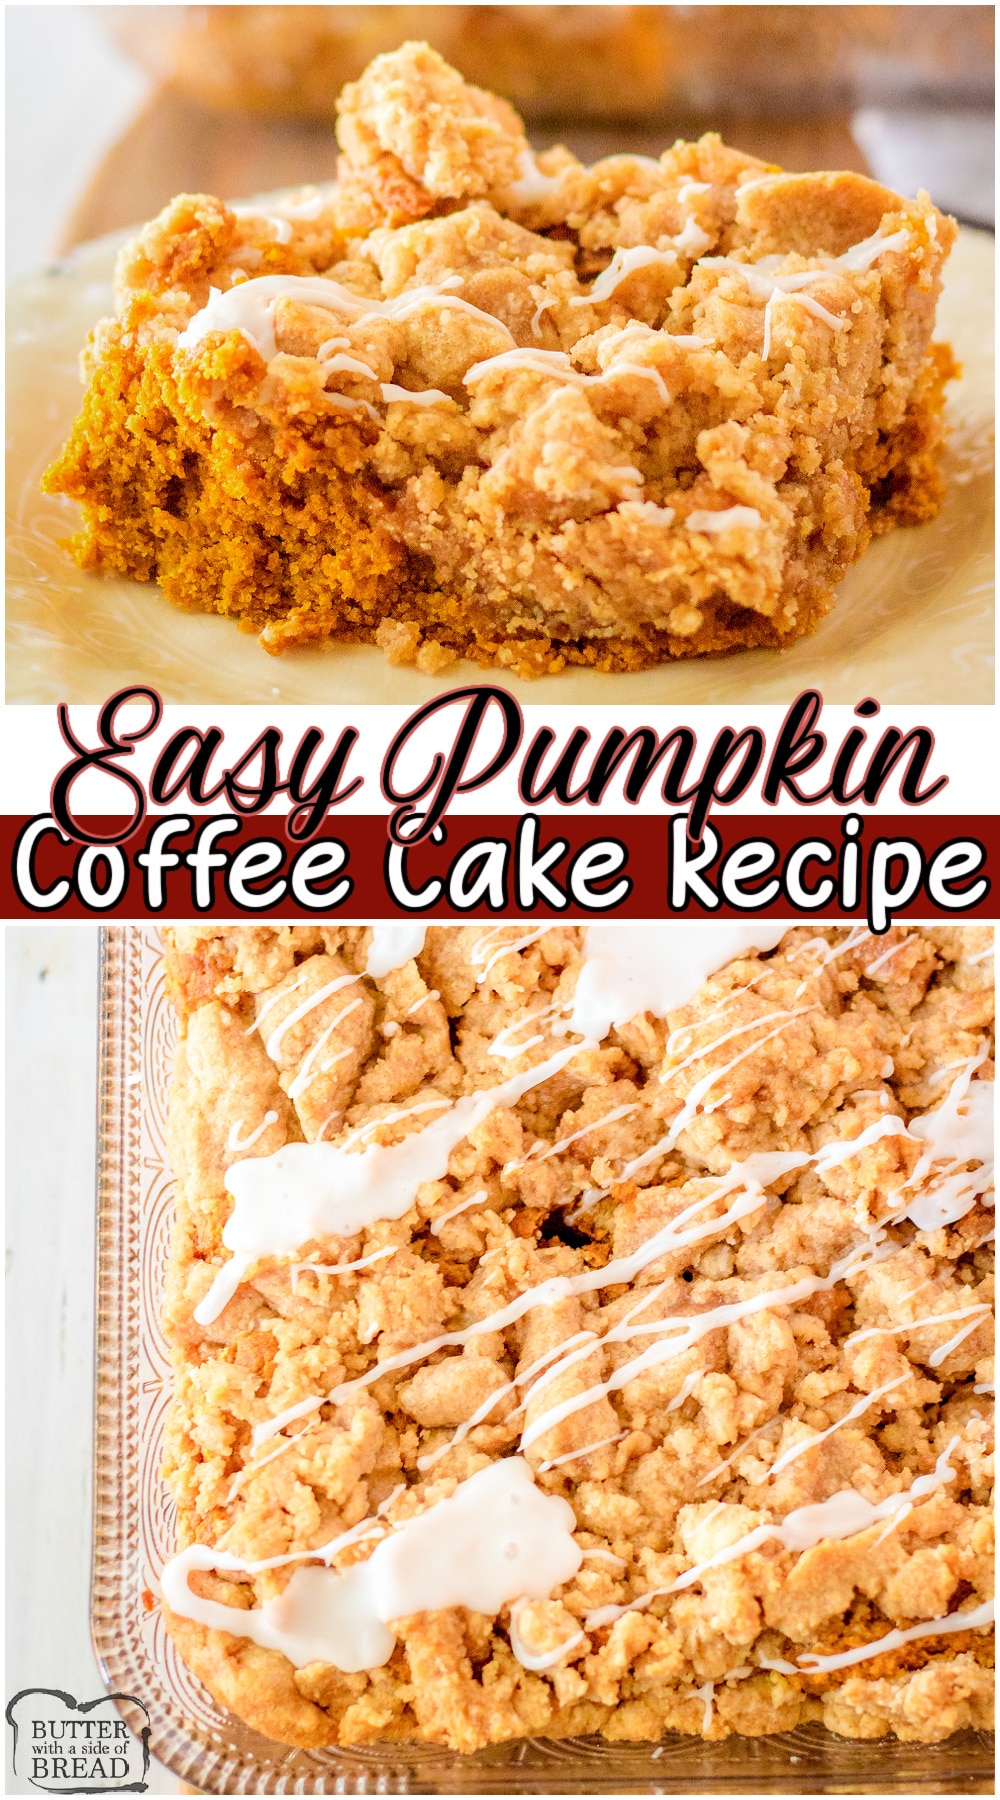 Easy Pumpkin coffee cake made with a cake mix & pumpkin, with a fantastic buttery brown sugar streusel topping! Lovely blend of Fall spices in a tender, delicious coffee cake recipe that's simple to make! #coffeecake #pumpkin #cakemix #breakfast #baking #Fall #easyrecipe from BUTTER WITH A SIDE OF BREAD